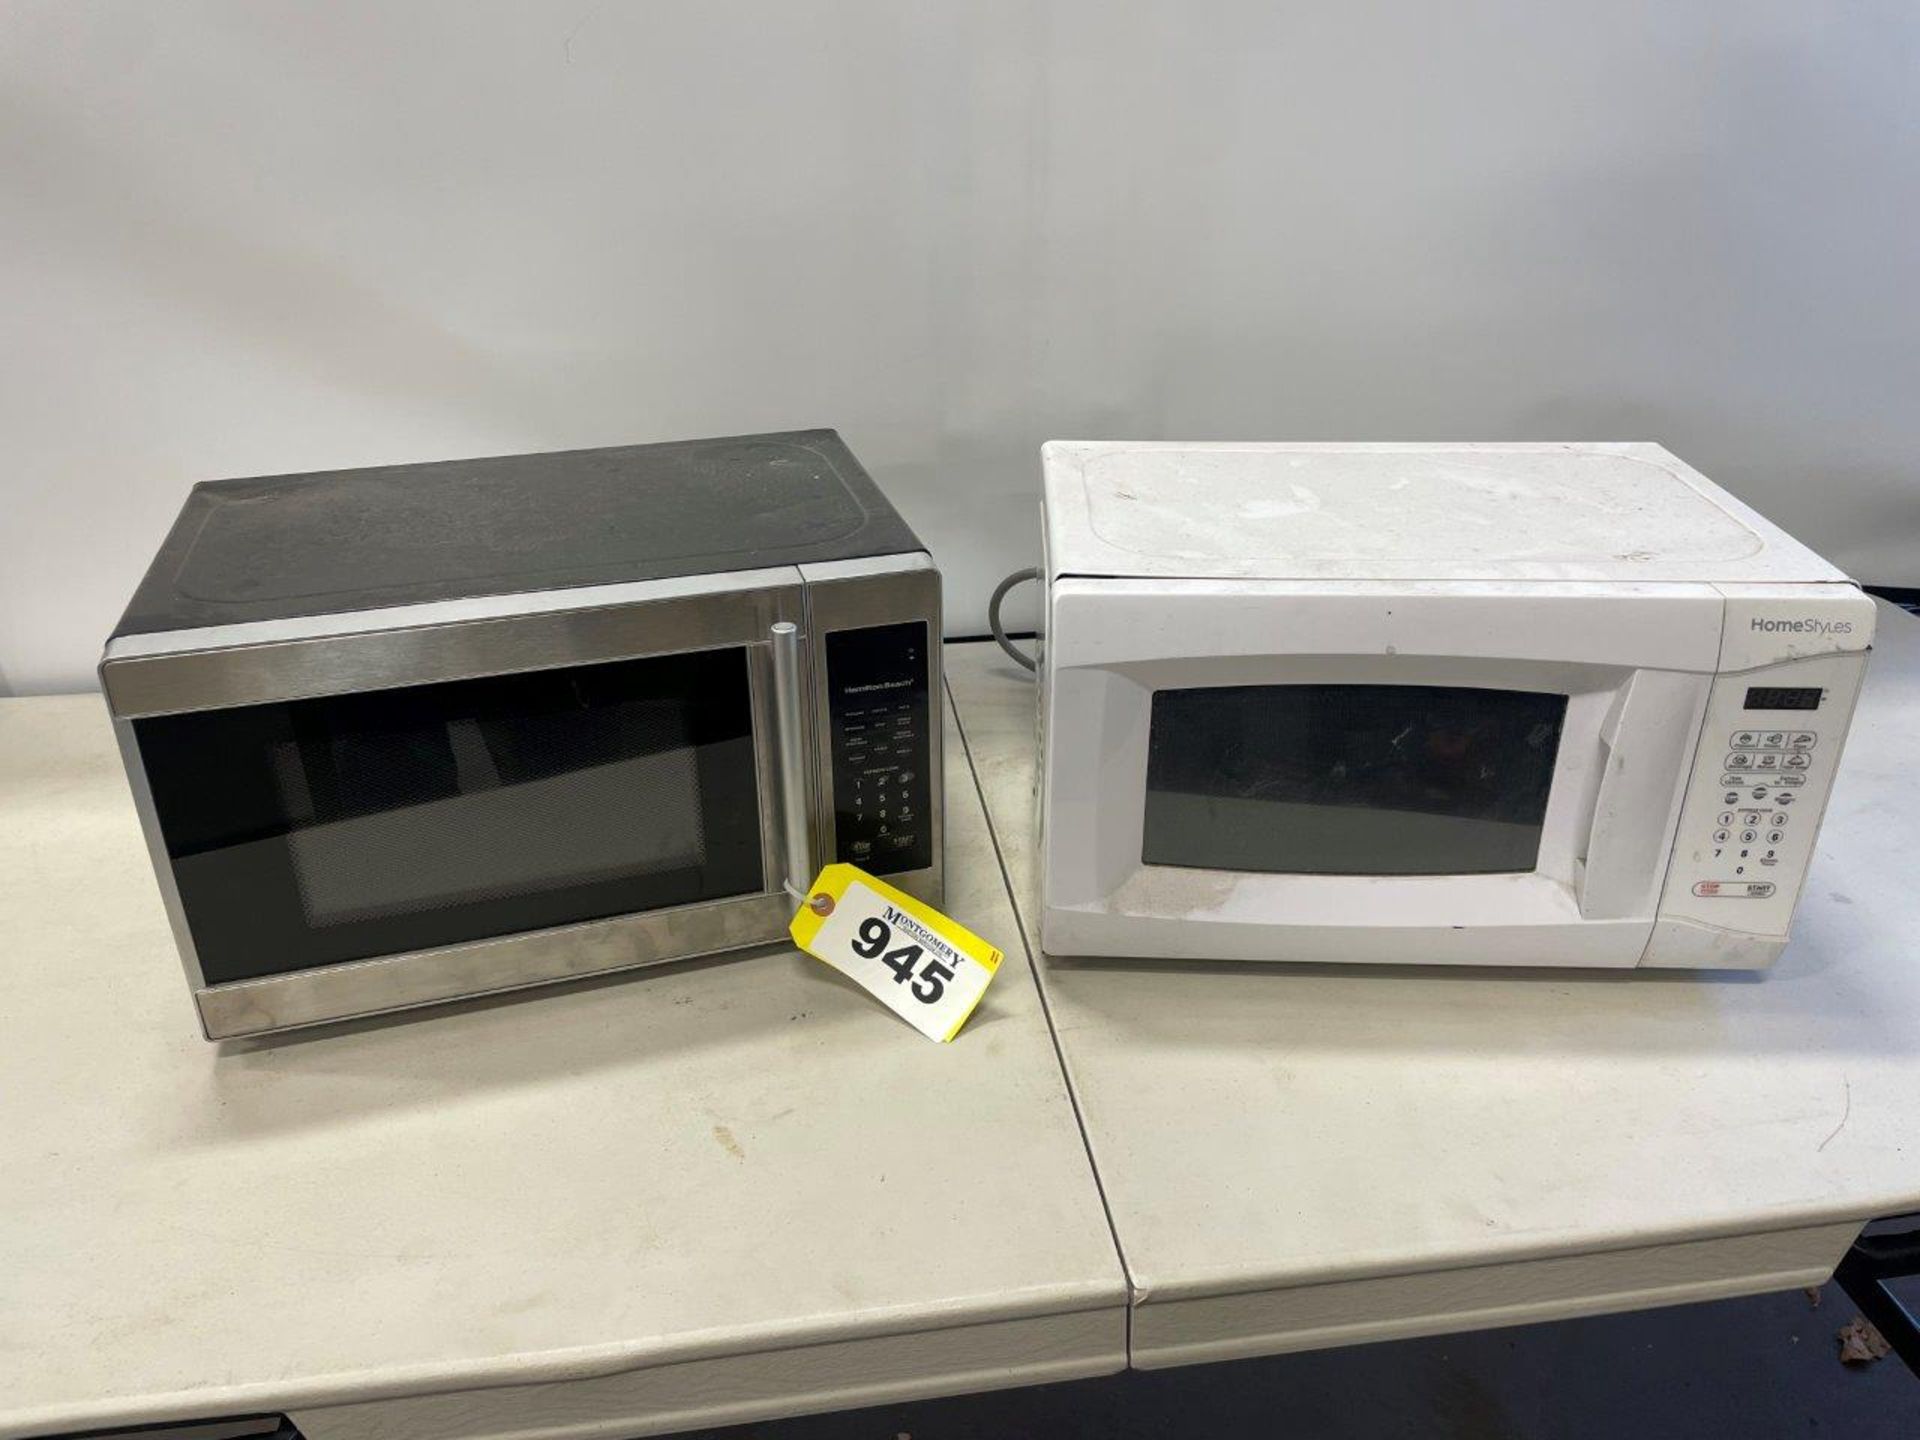 HAMILTON BEACH SS MICROWAVE OVEN AND HOME STYLES MICROWAVE OVEN